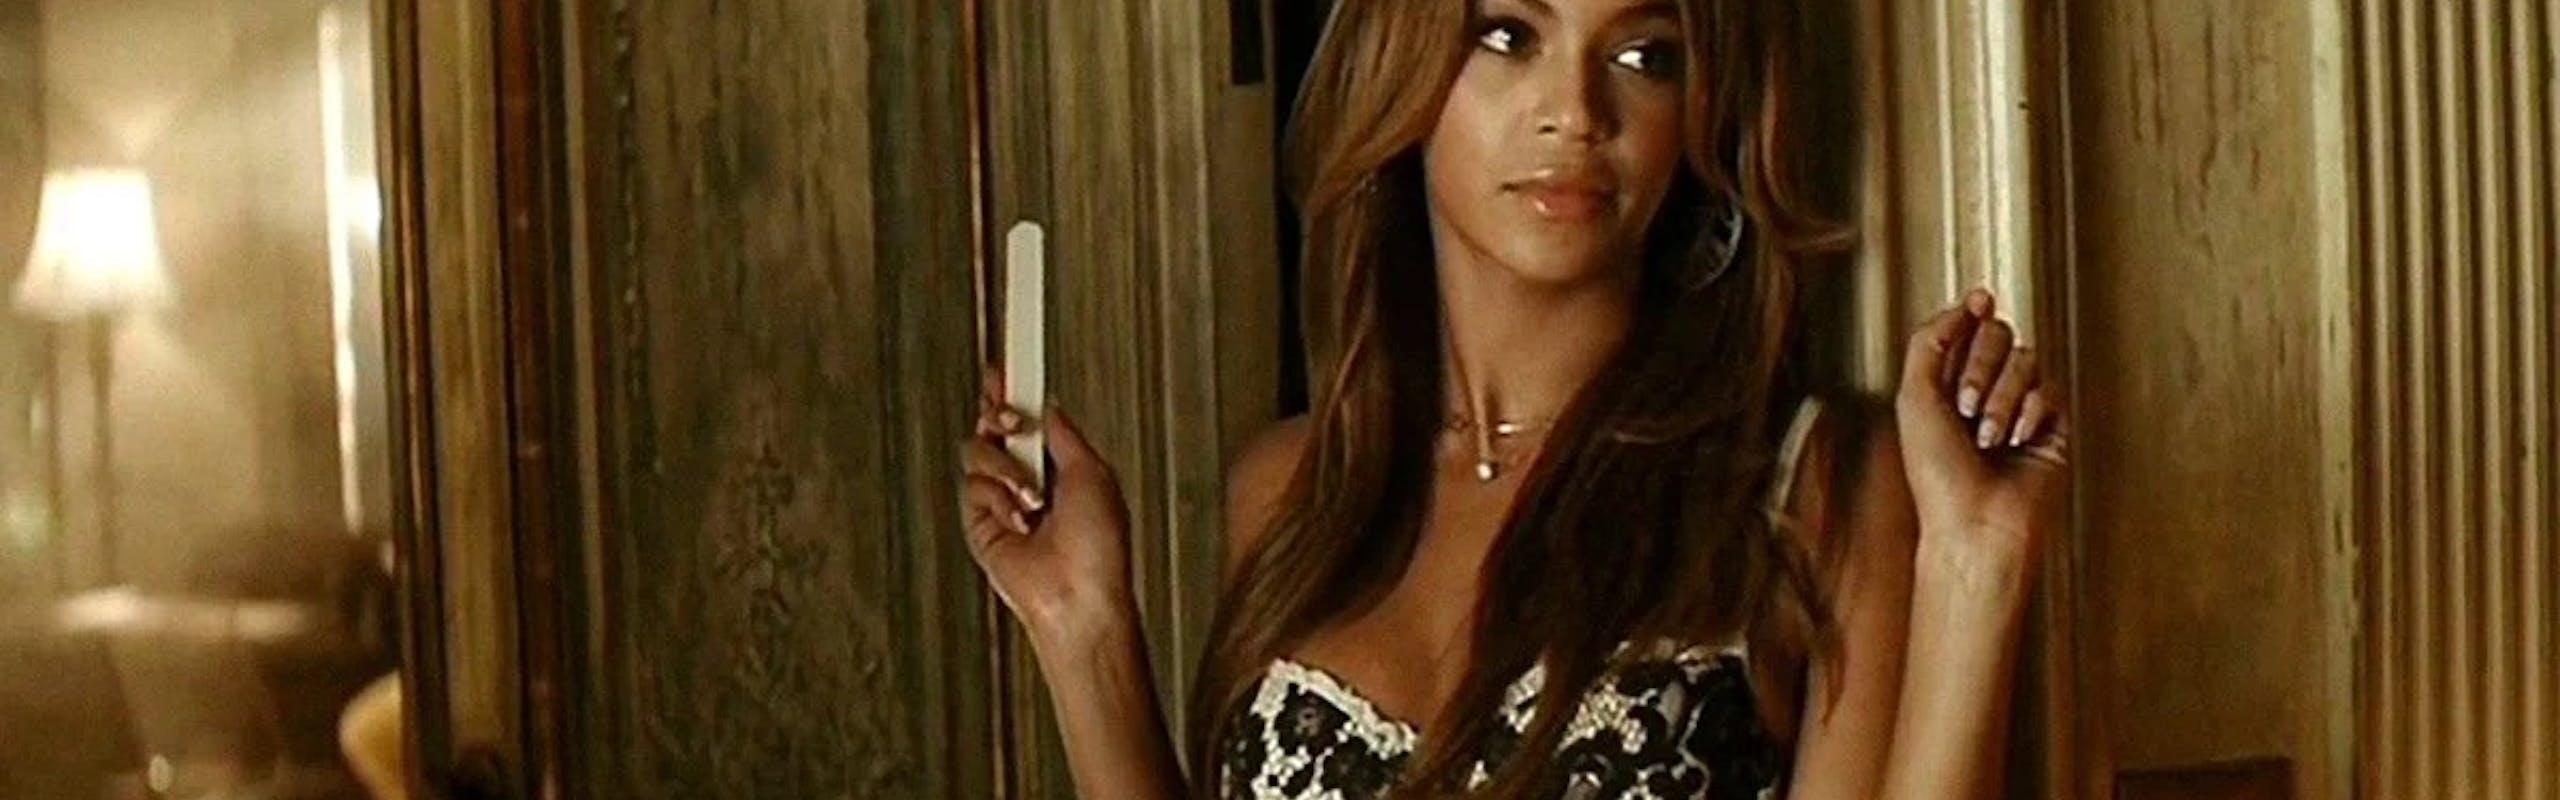 Beyonce in her music video for Irreplacable, holding a nail file and wearing a lace corset.